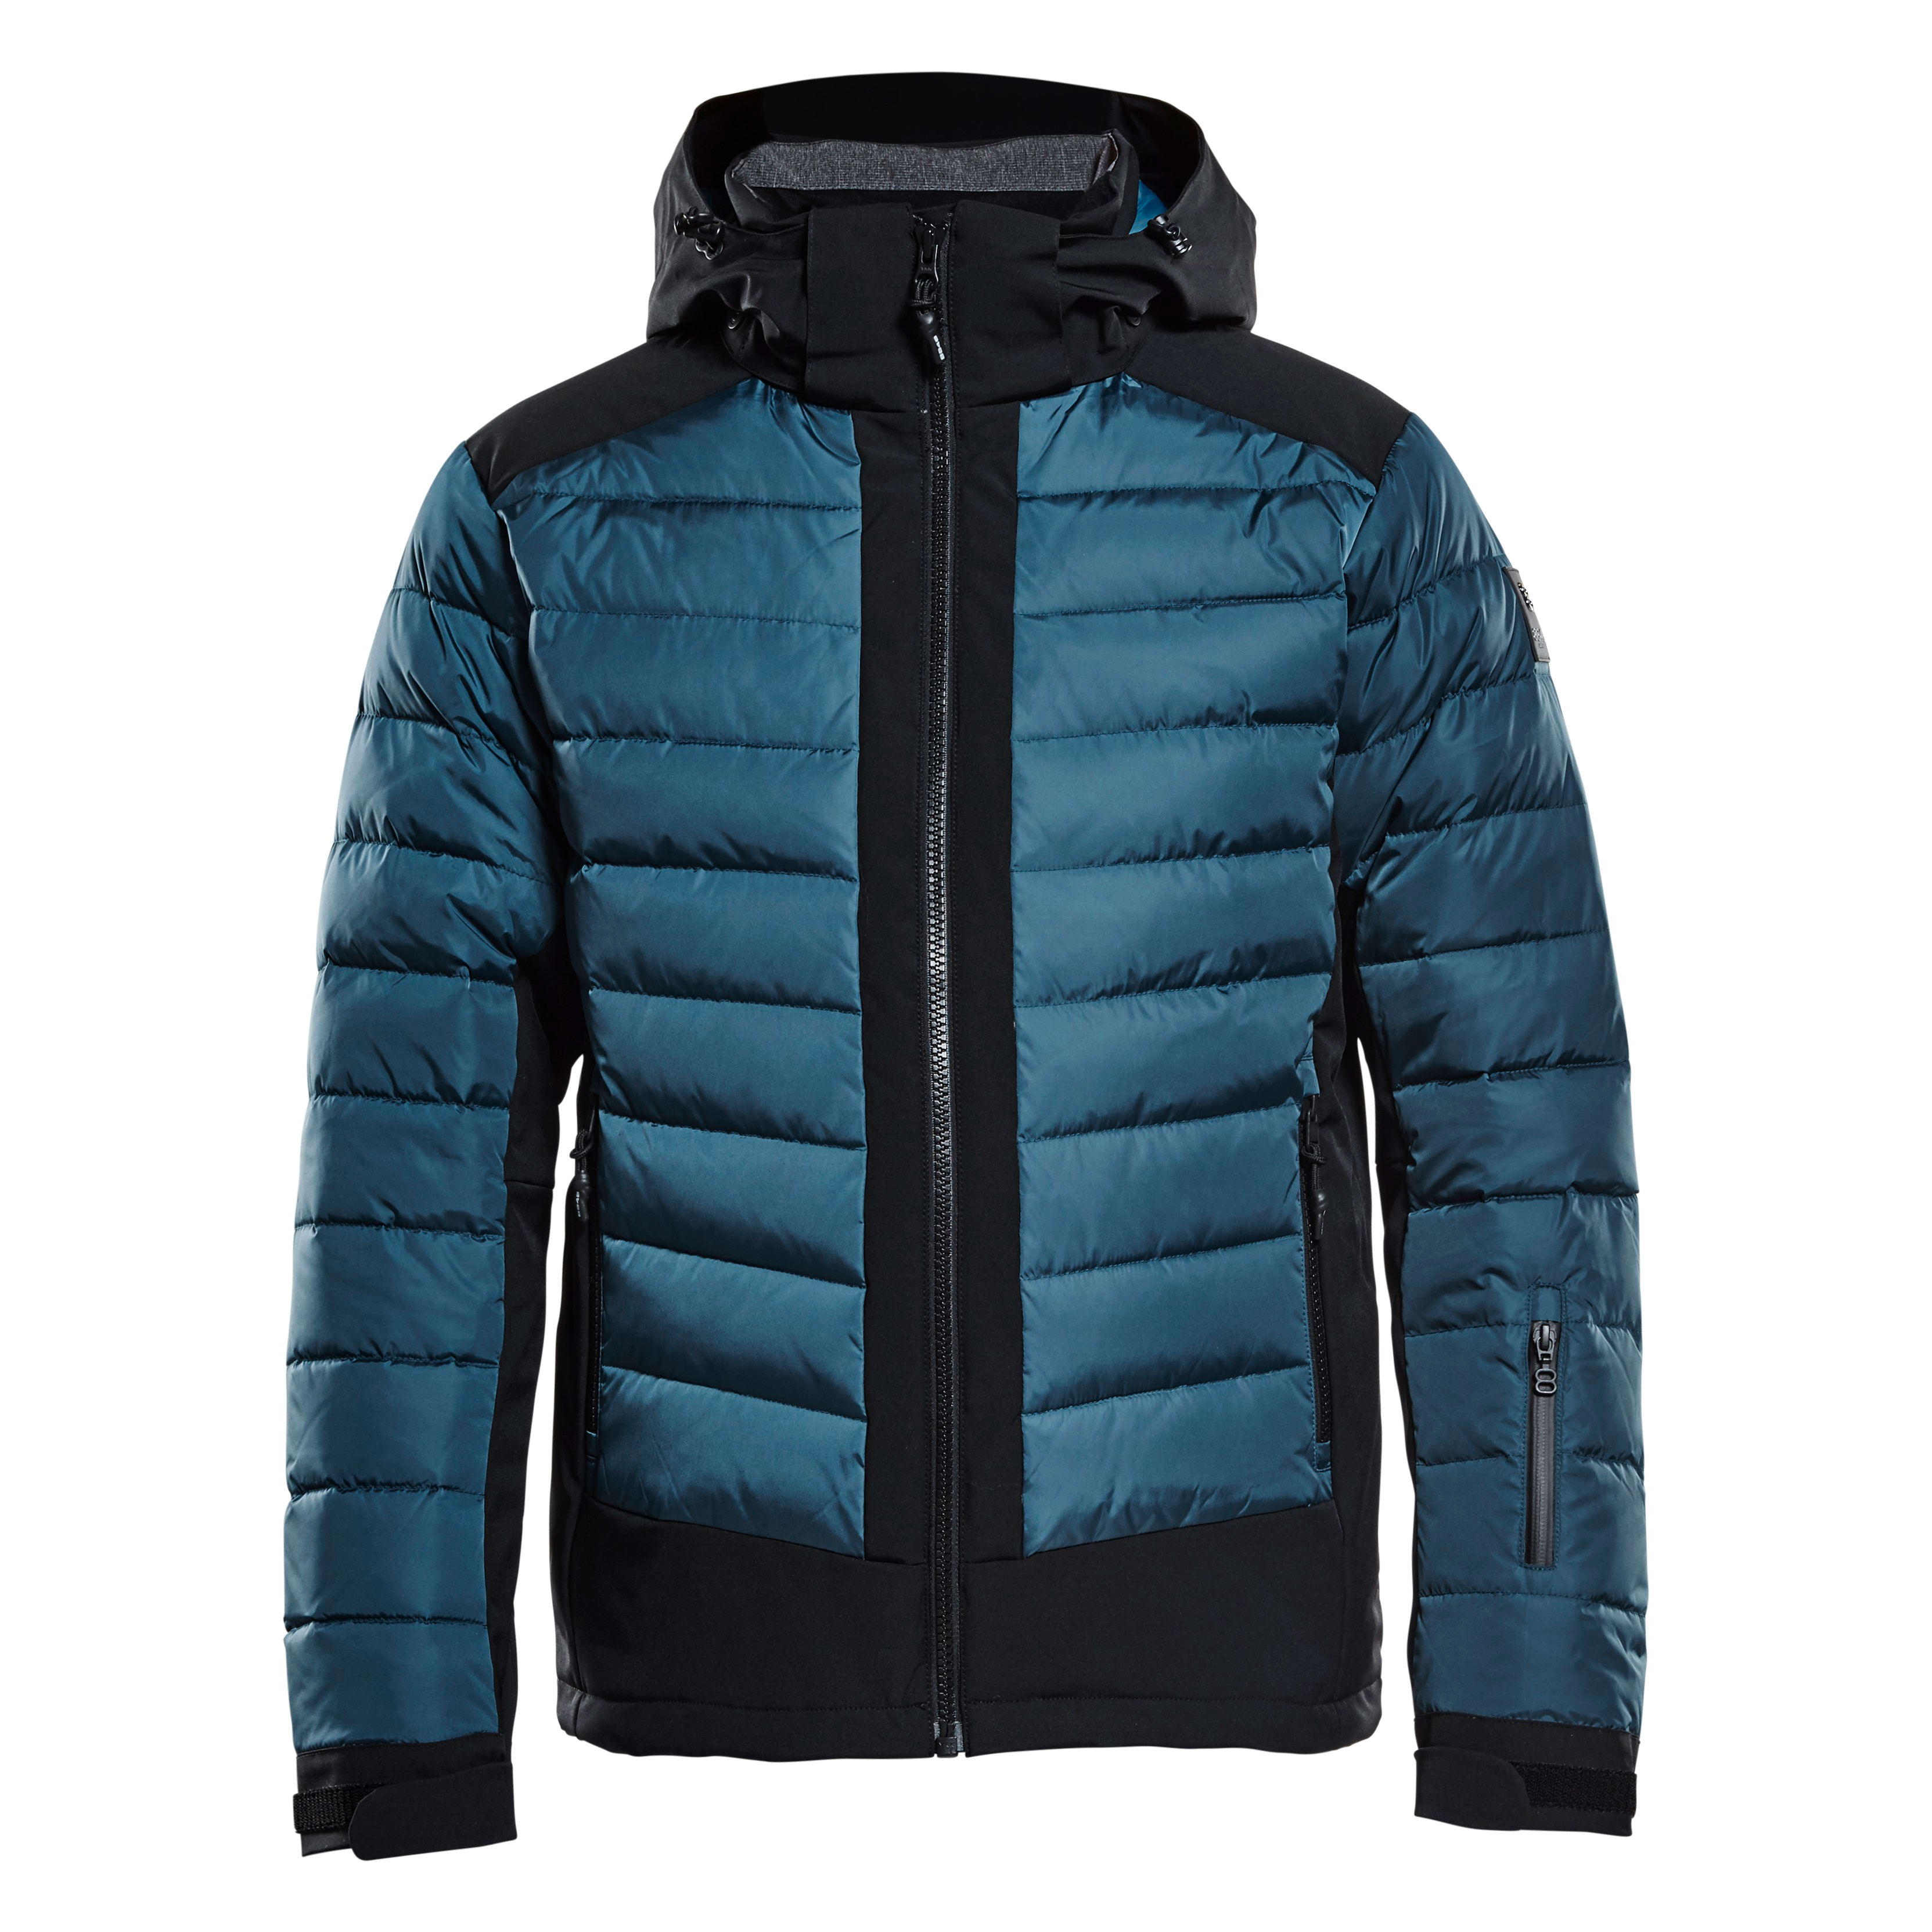 Mindre end Kostbar Sukkerrør Buy 8848 Altitude Fayston Jacket from Outnorth